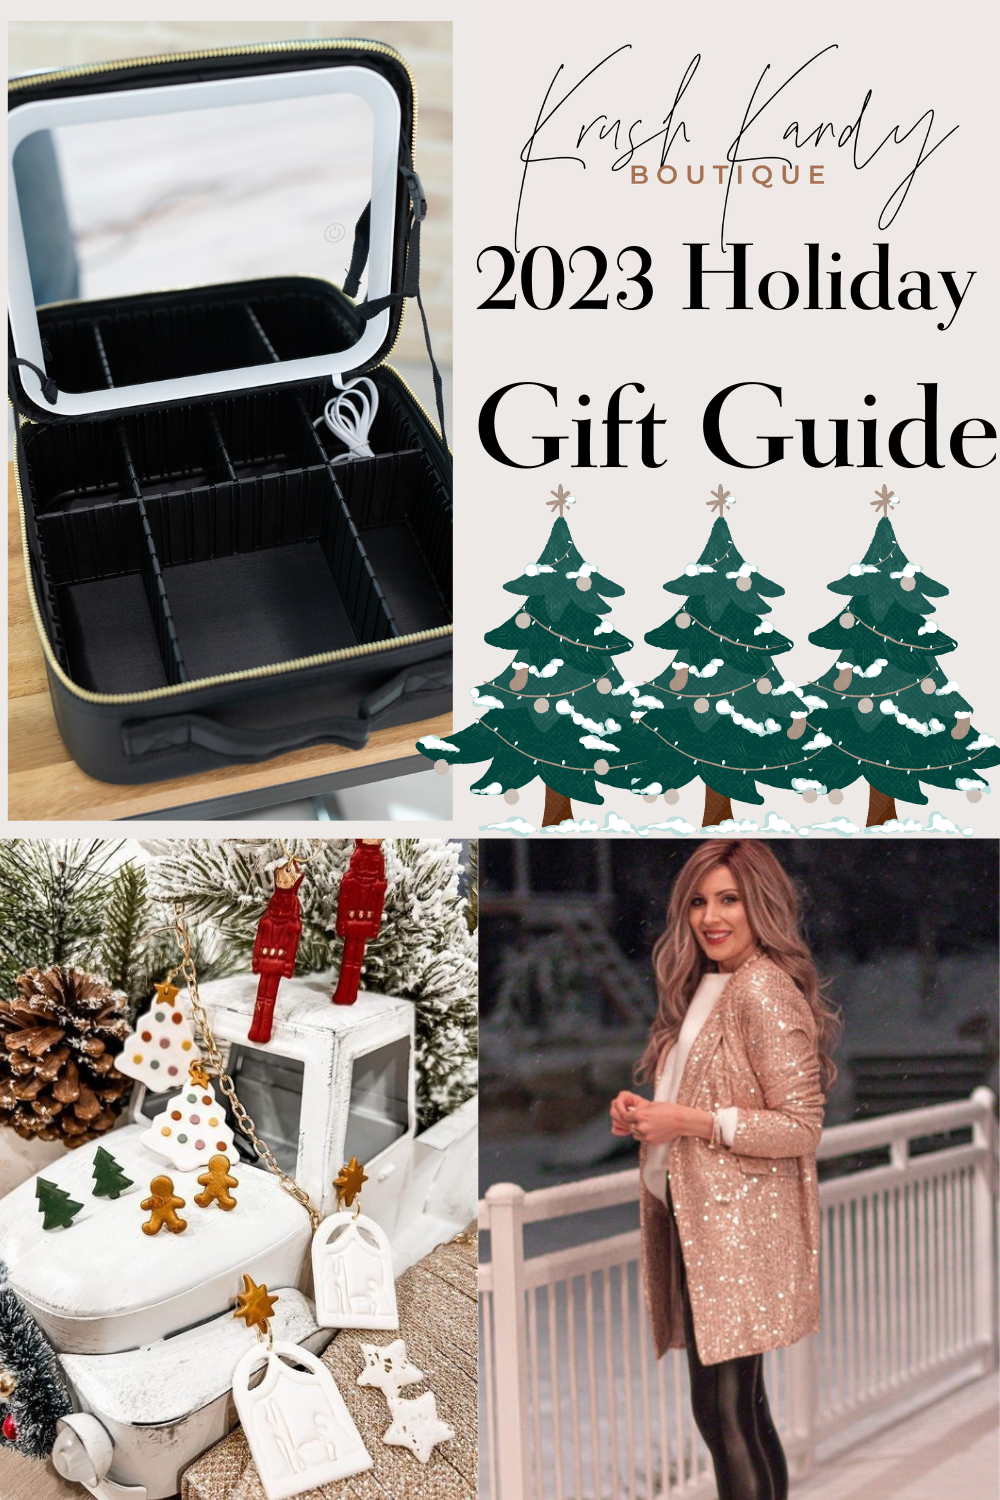 Krush Kandy Boutique 2023 Holiday Gift Guide | Trendy and Unique Items for Women